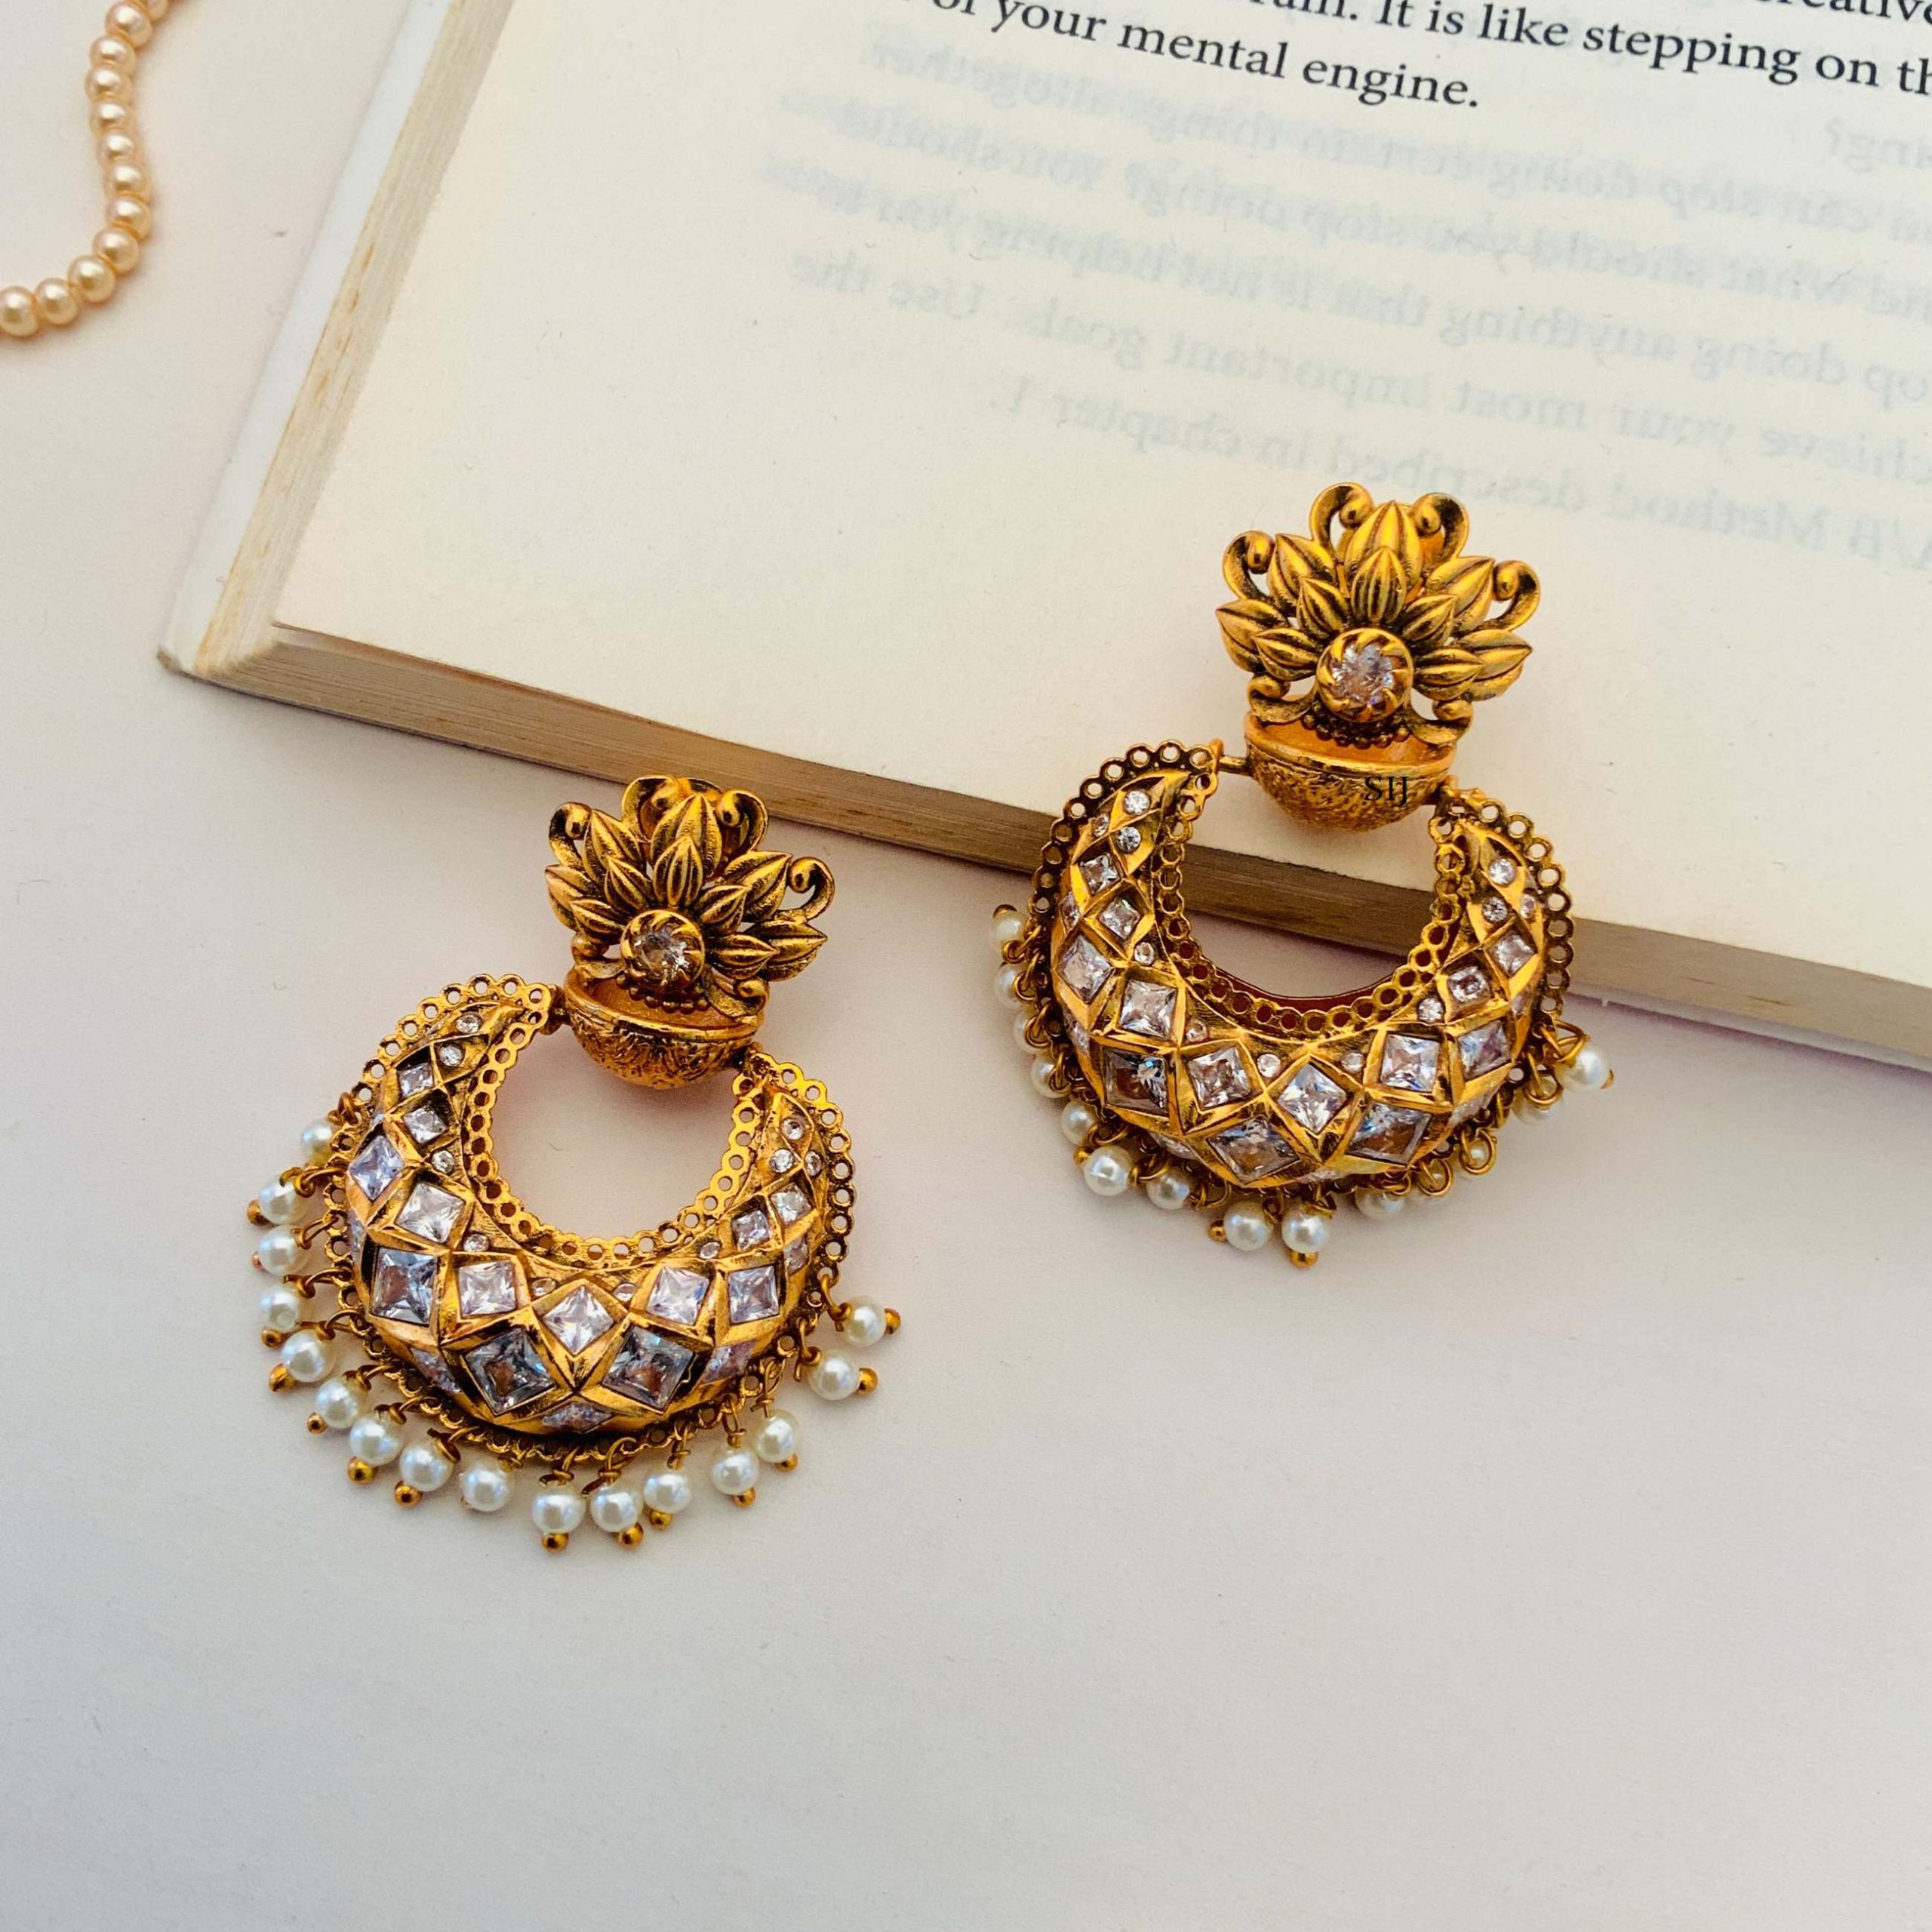 Antique Chand Bali Kundan Earrings with Pearls-2